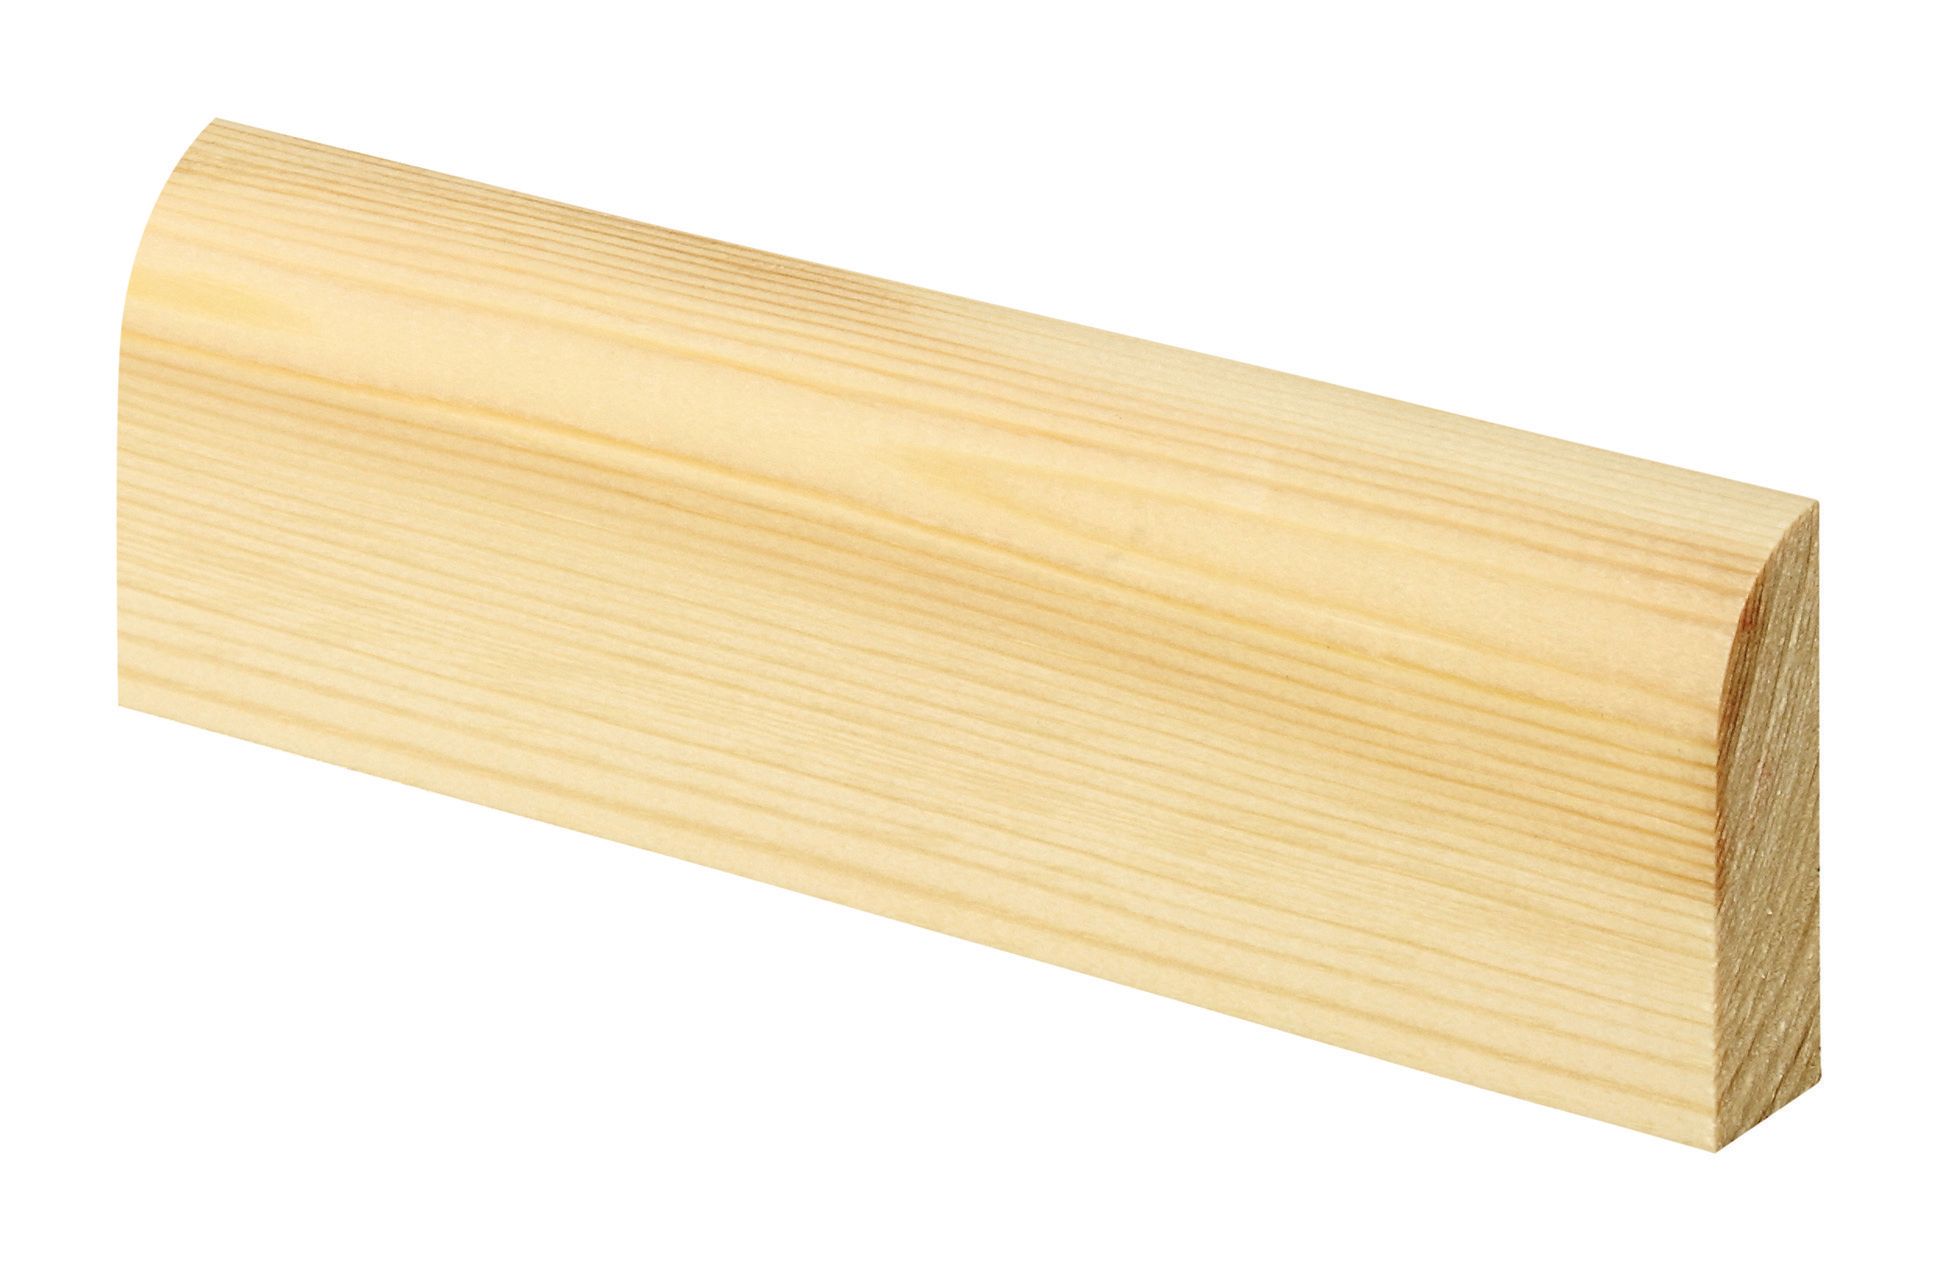 Image of Wickes Large Round Pine Architrave - 15mm x 45mm x 2100mm